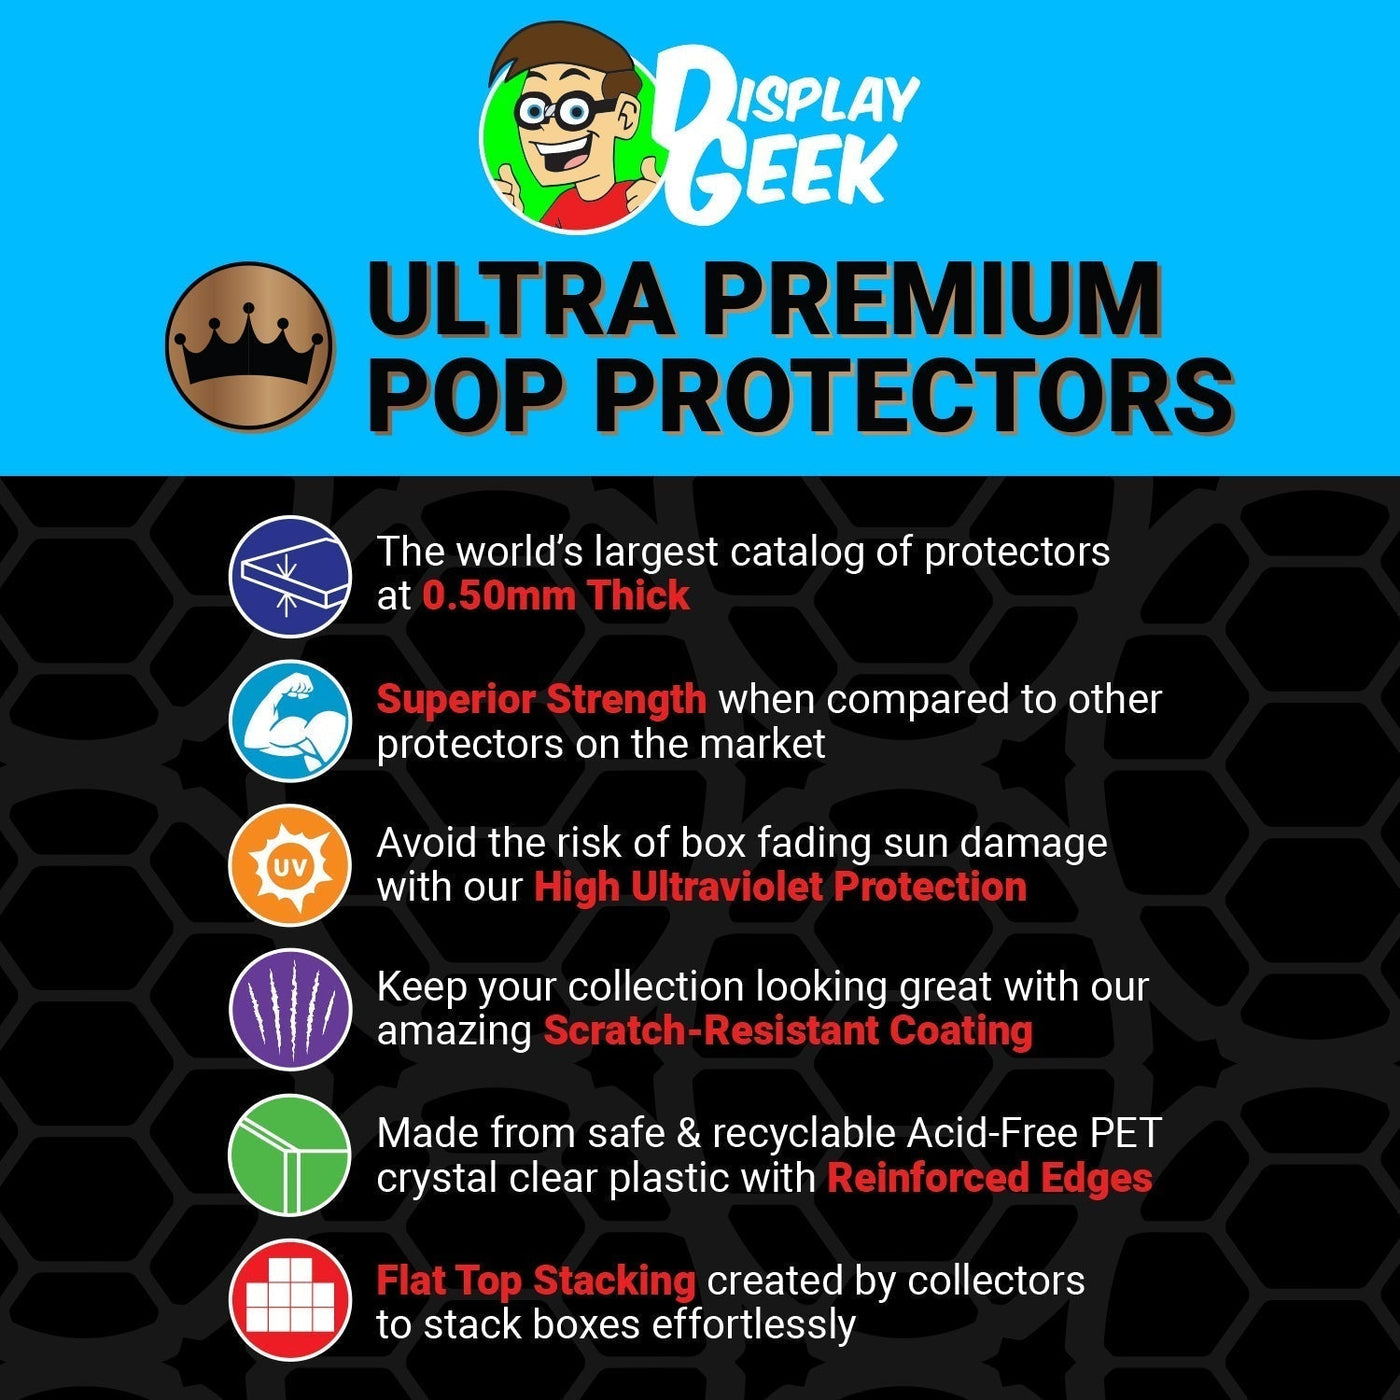 Pop Protector for Street Art Captain America #752 Funko Pop Deluxe on The Protector Guide App by Display Geek